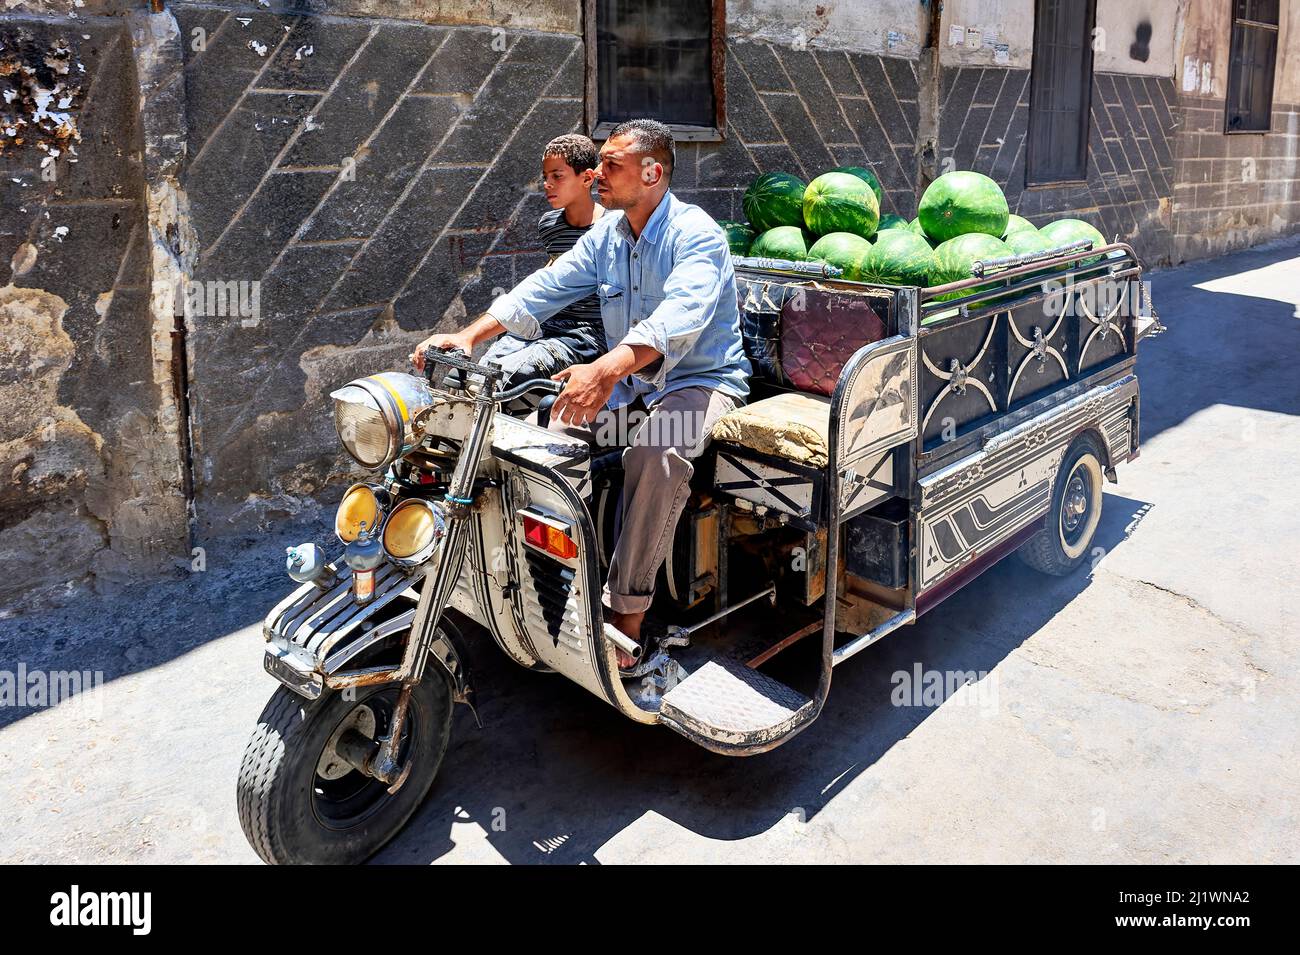 Syria. Carrying watermelons in the streets of Damascus. Stock Photo